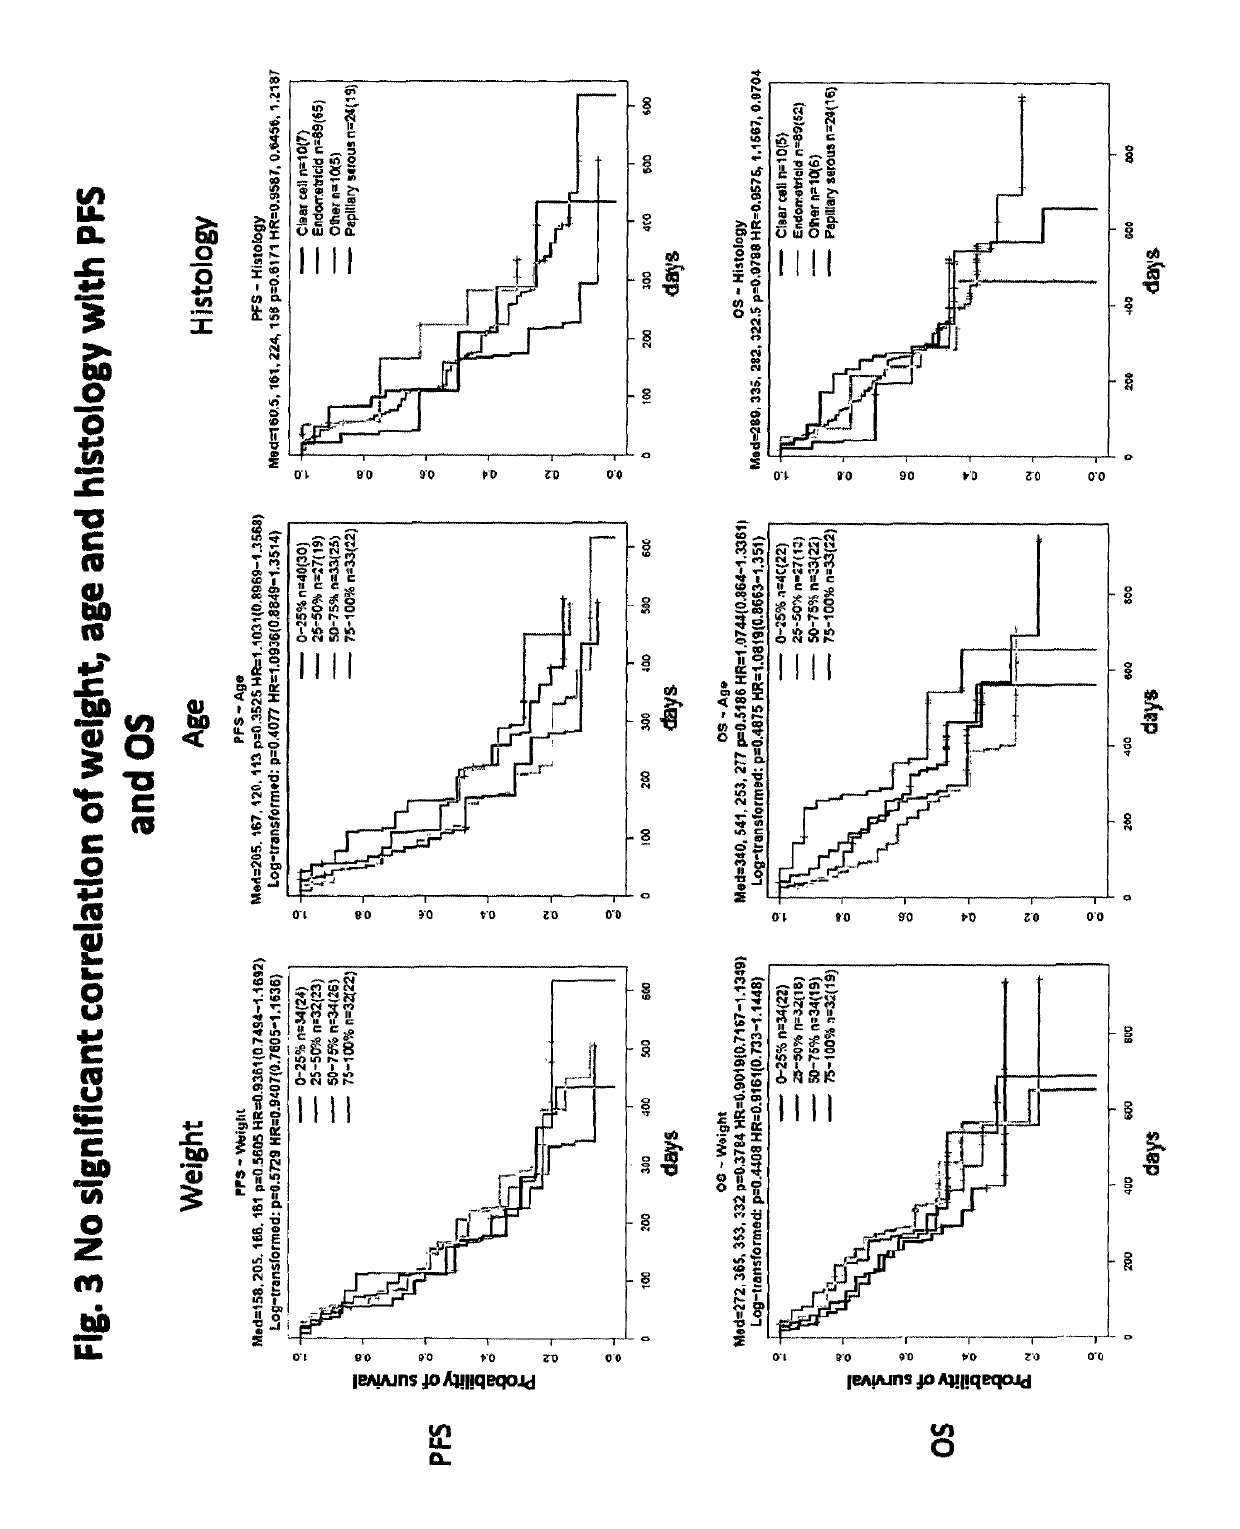 Biomarkers for predicting and assessing responsiveness of endometrial cancer subjects to lenvatinib compounds